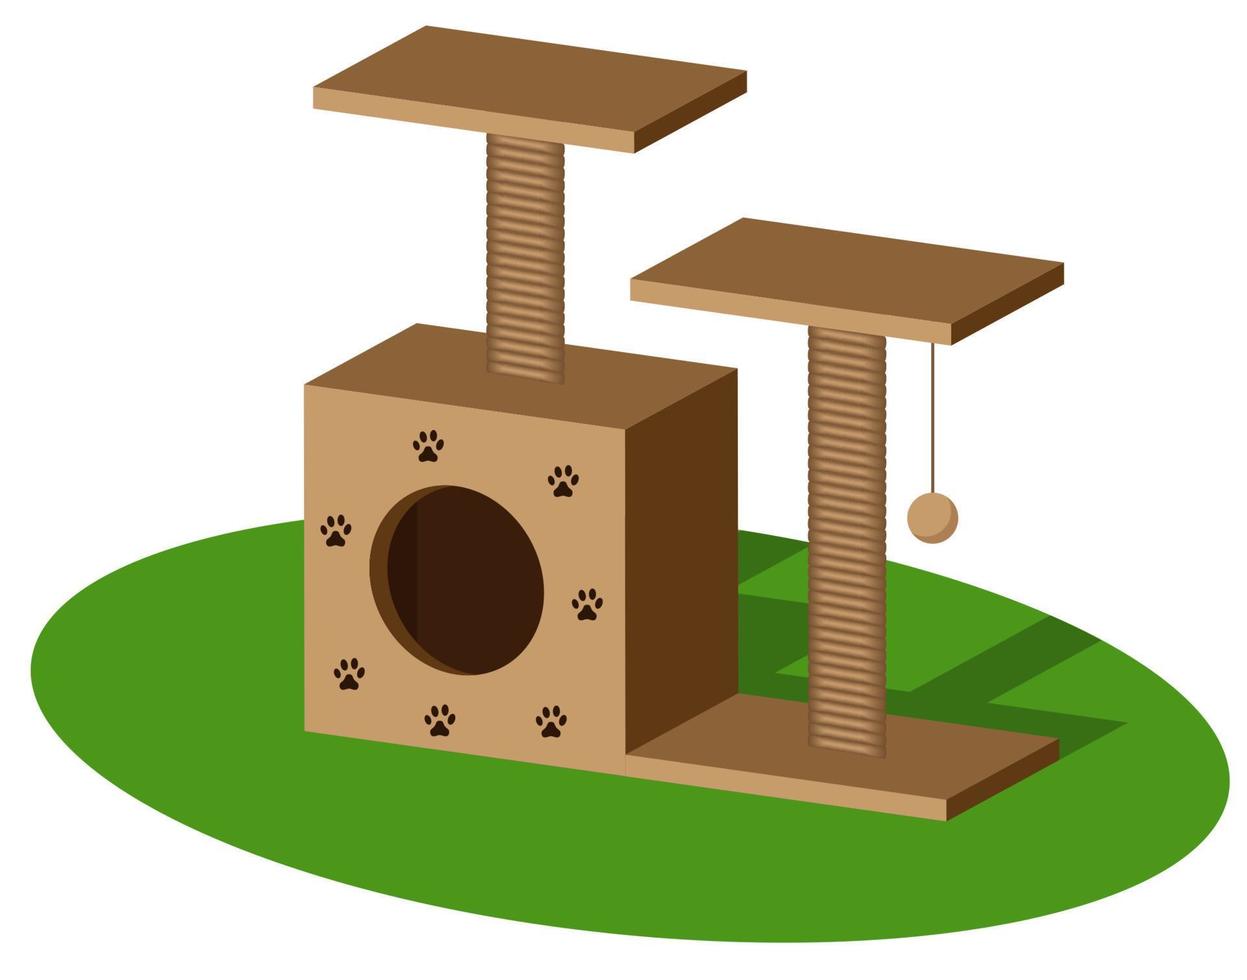 Jungle gym for cats with cat house and scratching post. Isolated pet supply. Realistic illustration of cat furniture on white background. Vector illustration.